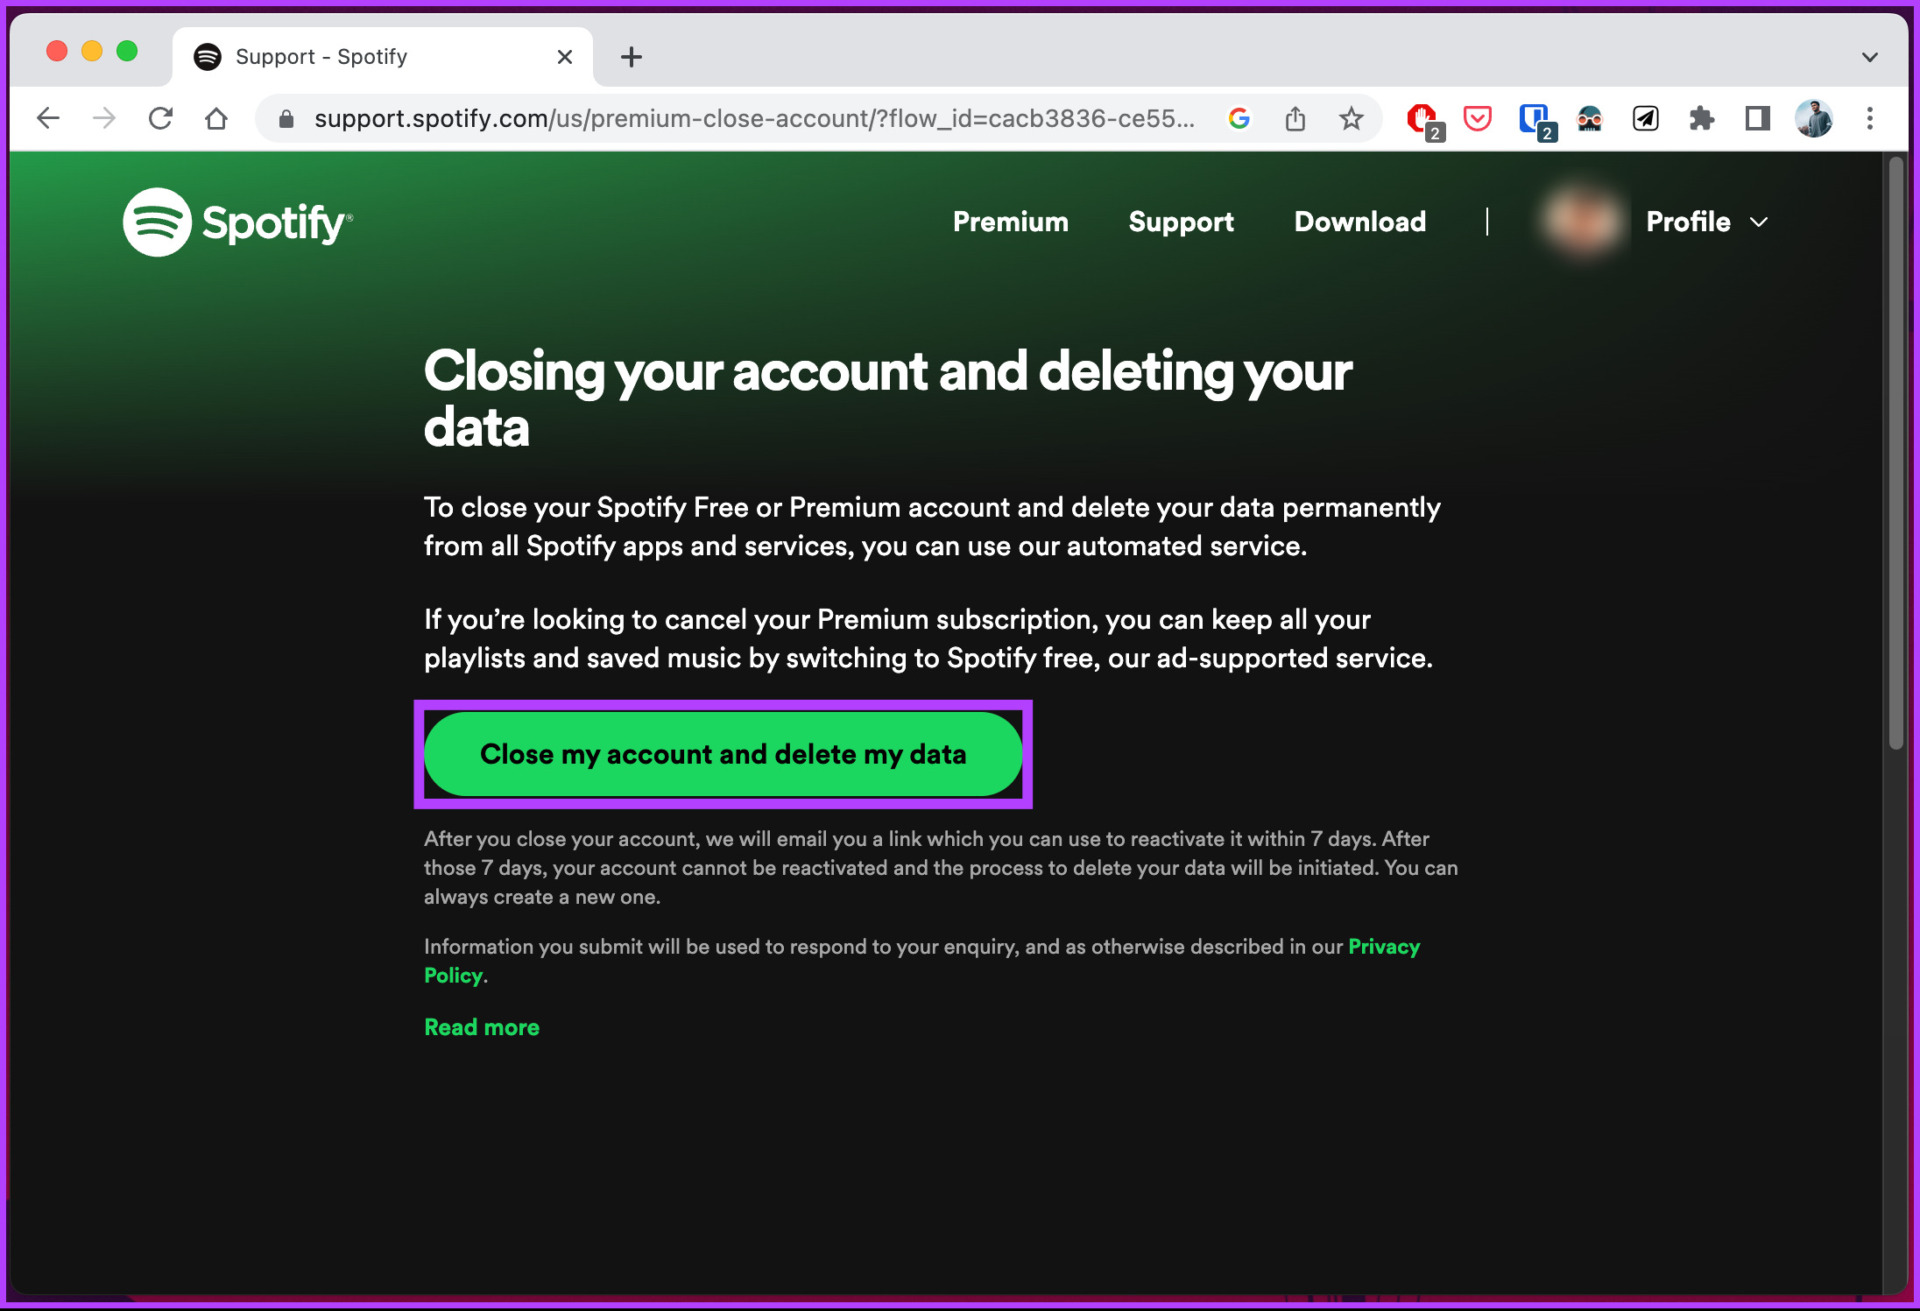 click the 'Close my account and delete my data' button